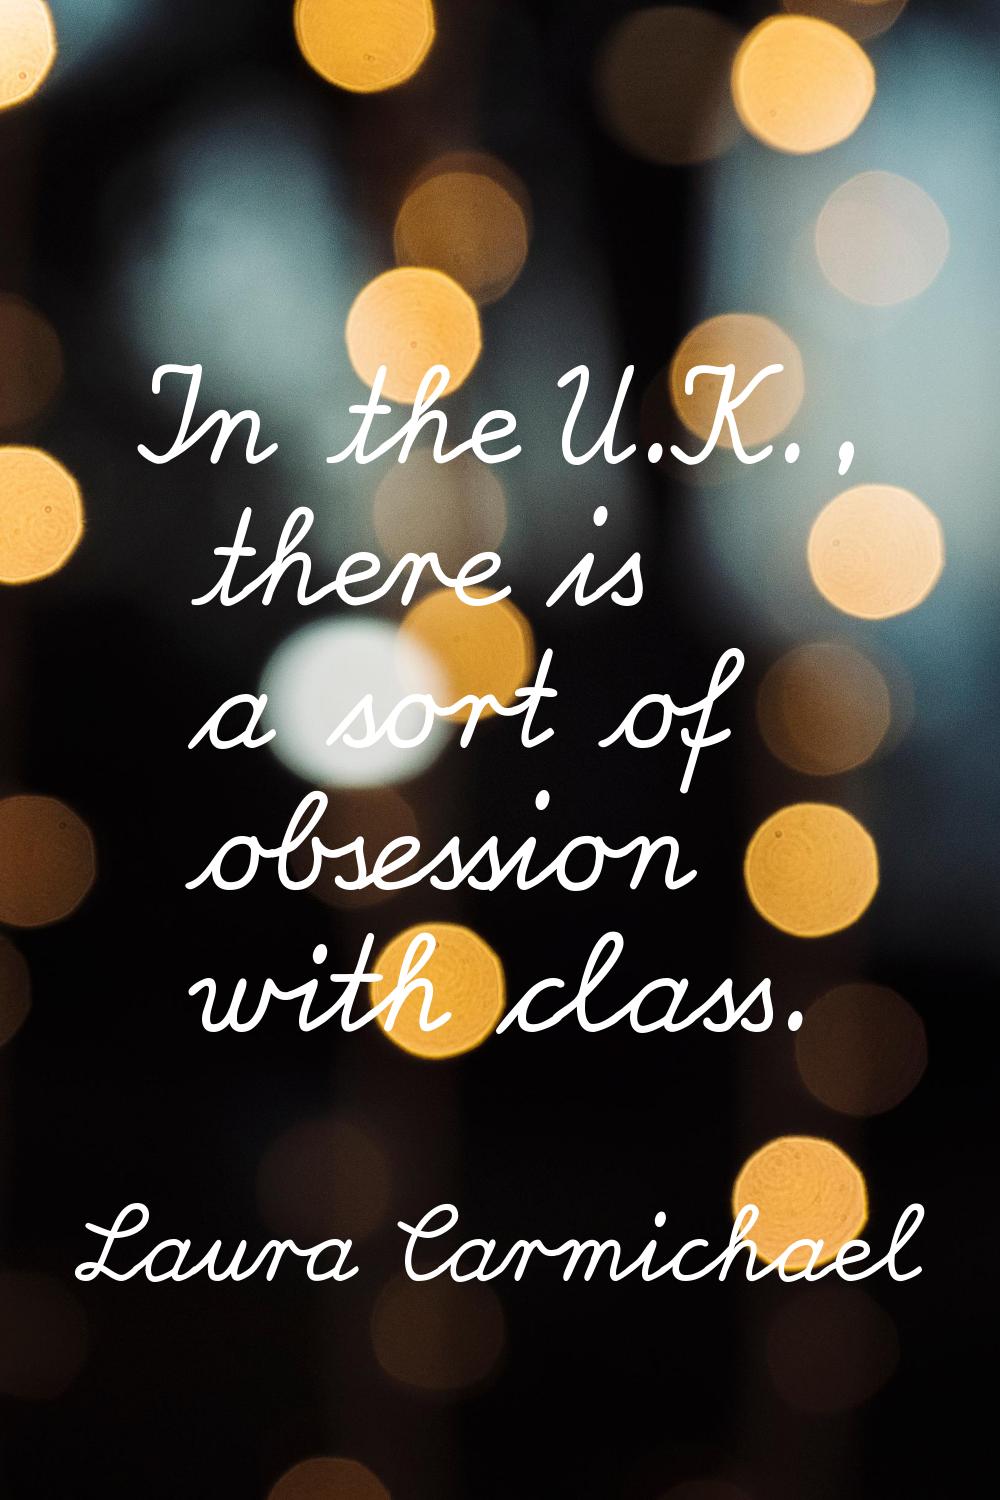 In the U.K., there is a sort of obsession with class.